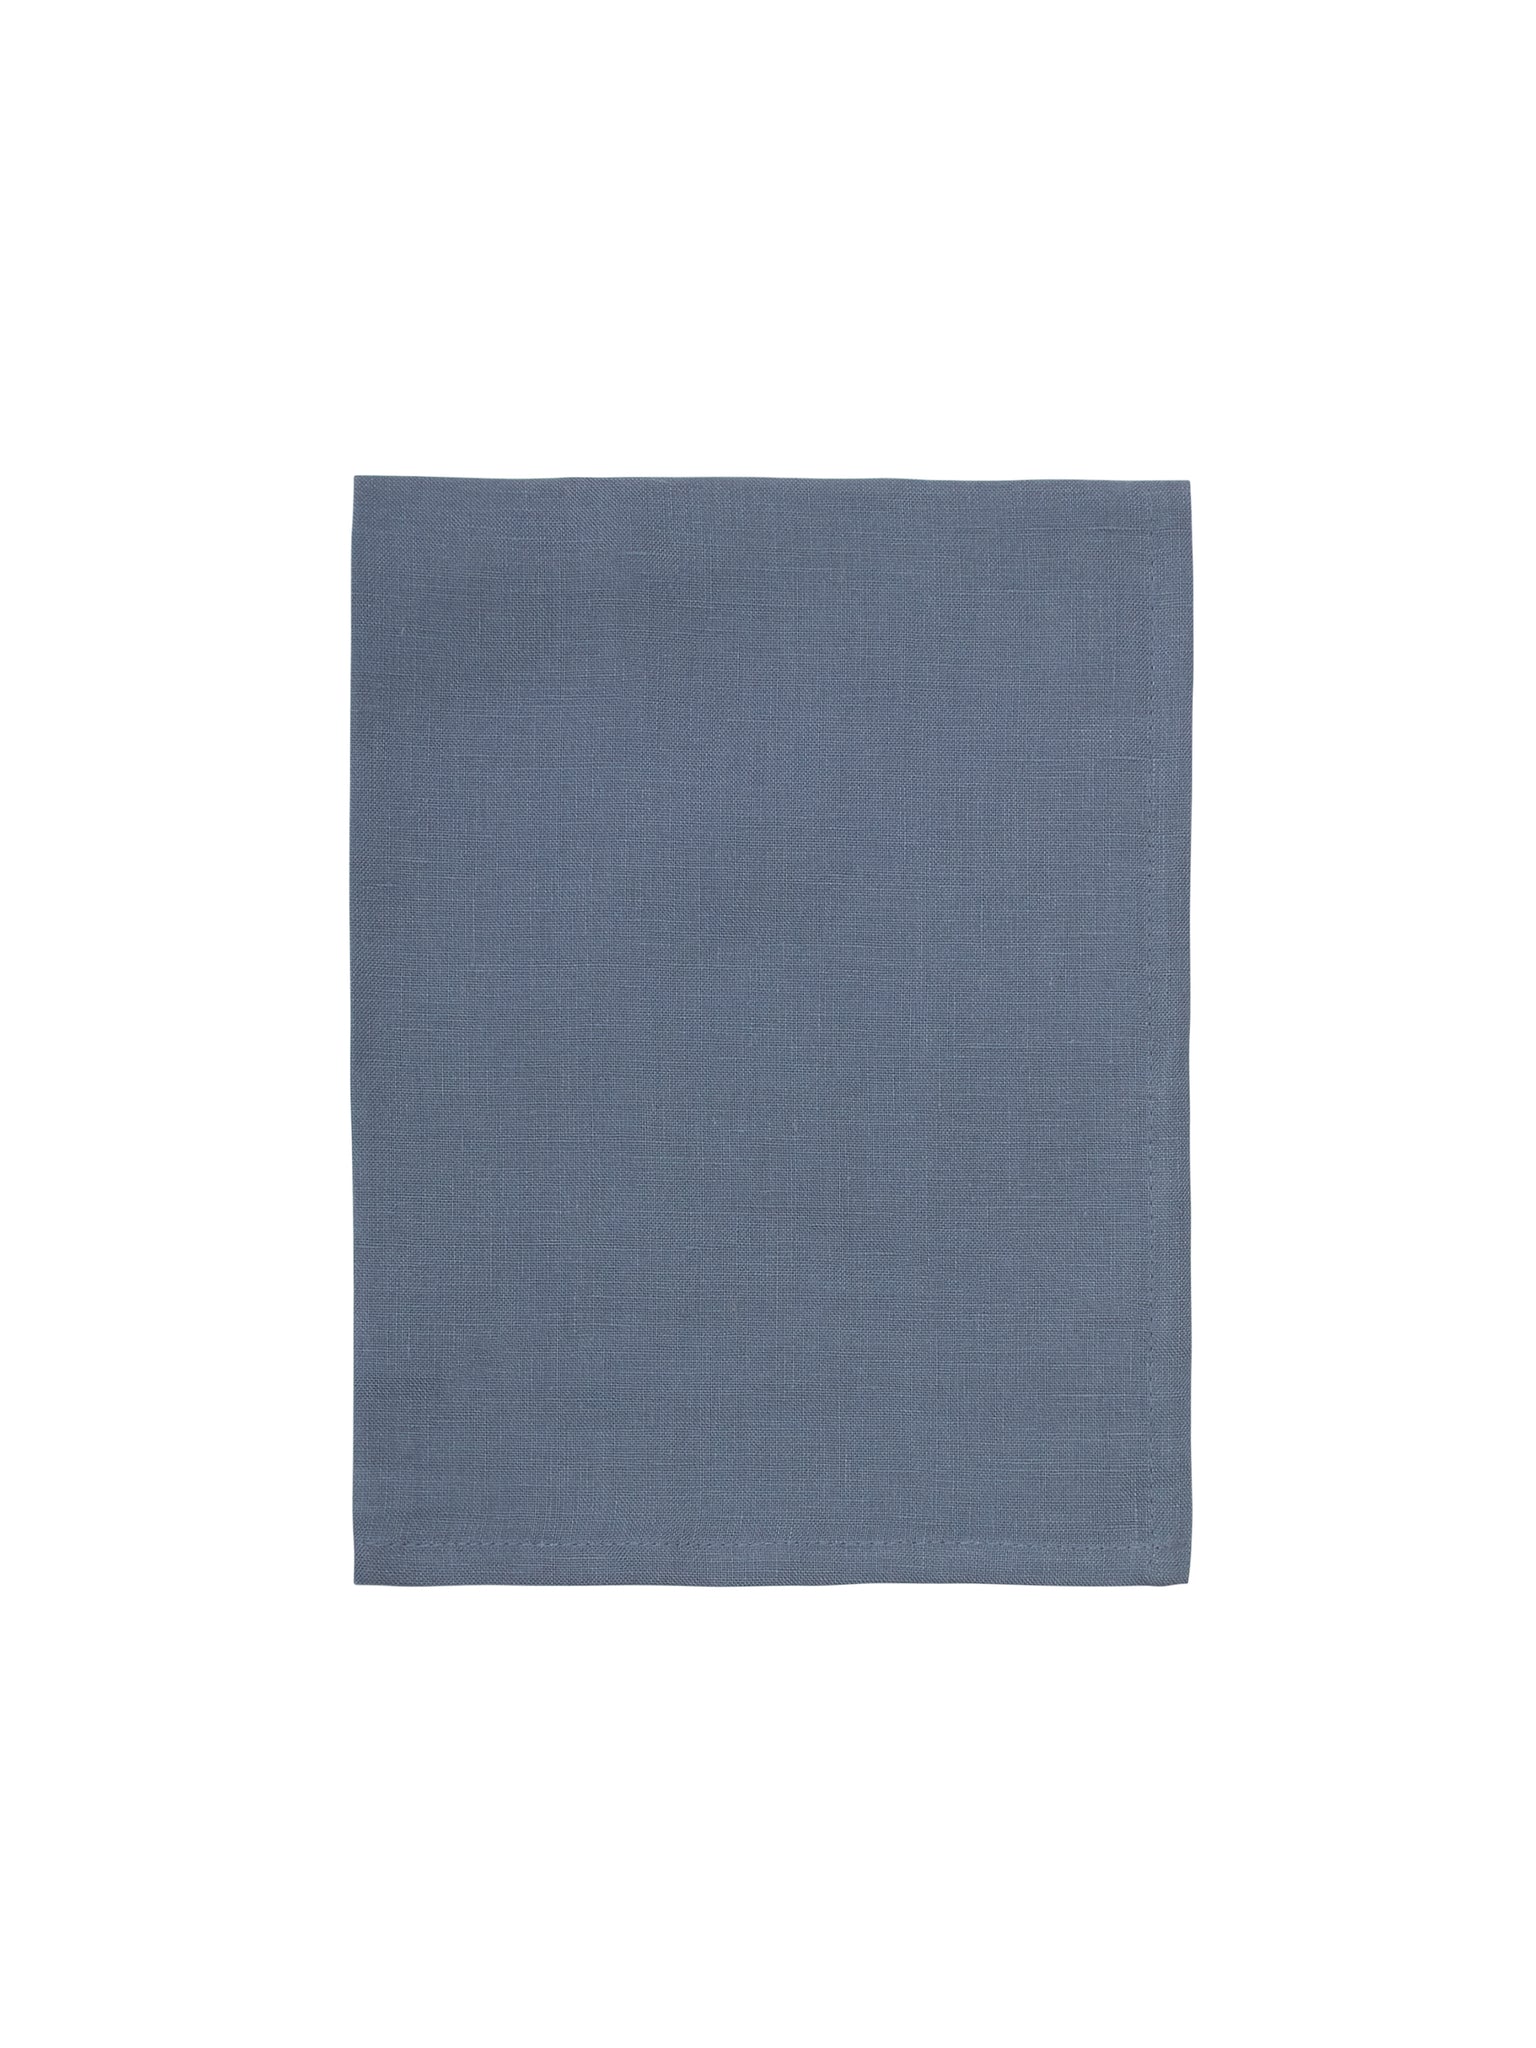 Libeco Vence Collection Old Denim Everyday Napkins Set of 4 Weston Table